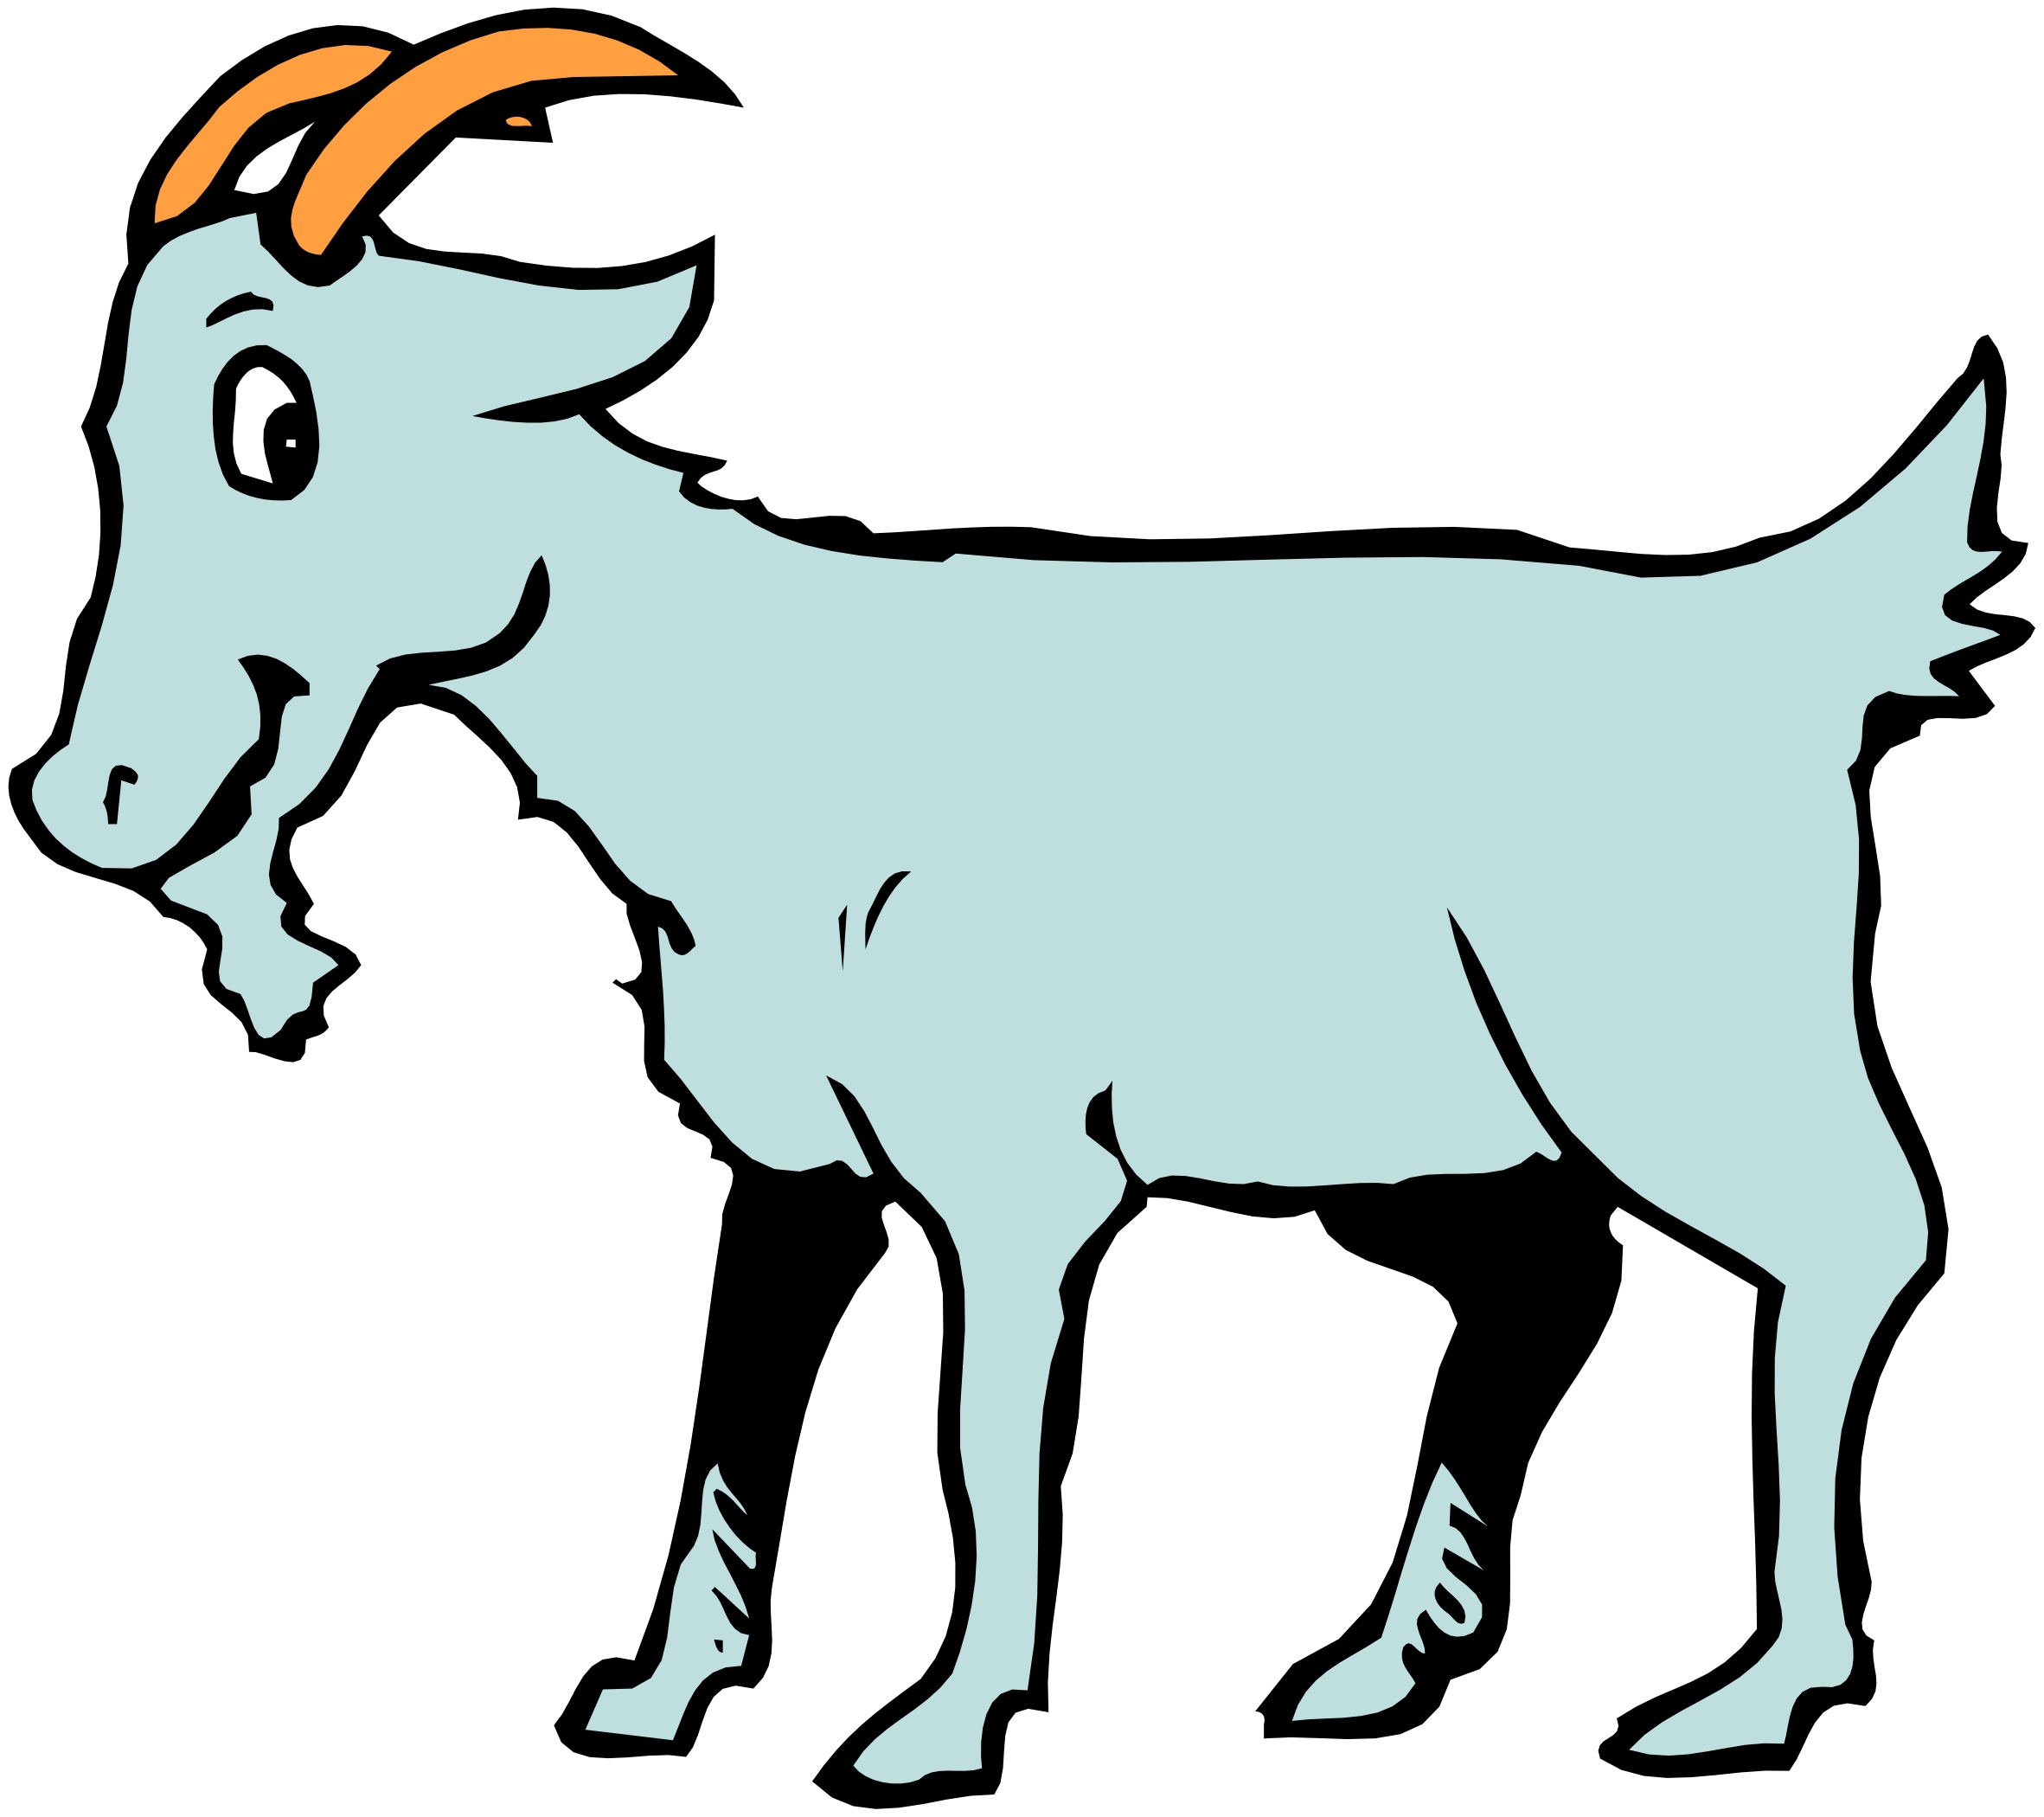 Goat Animated - ClipArt Best